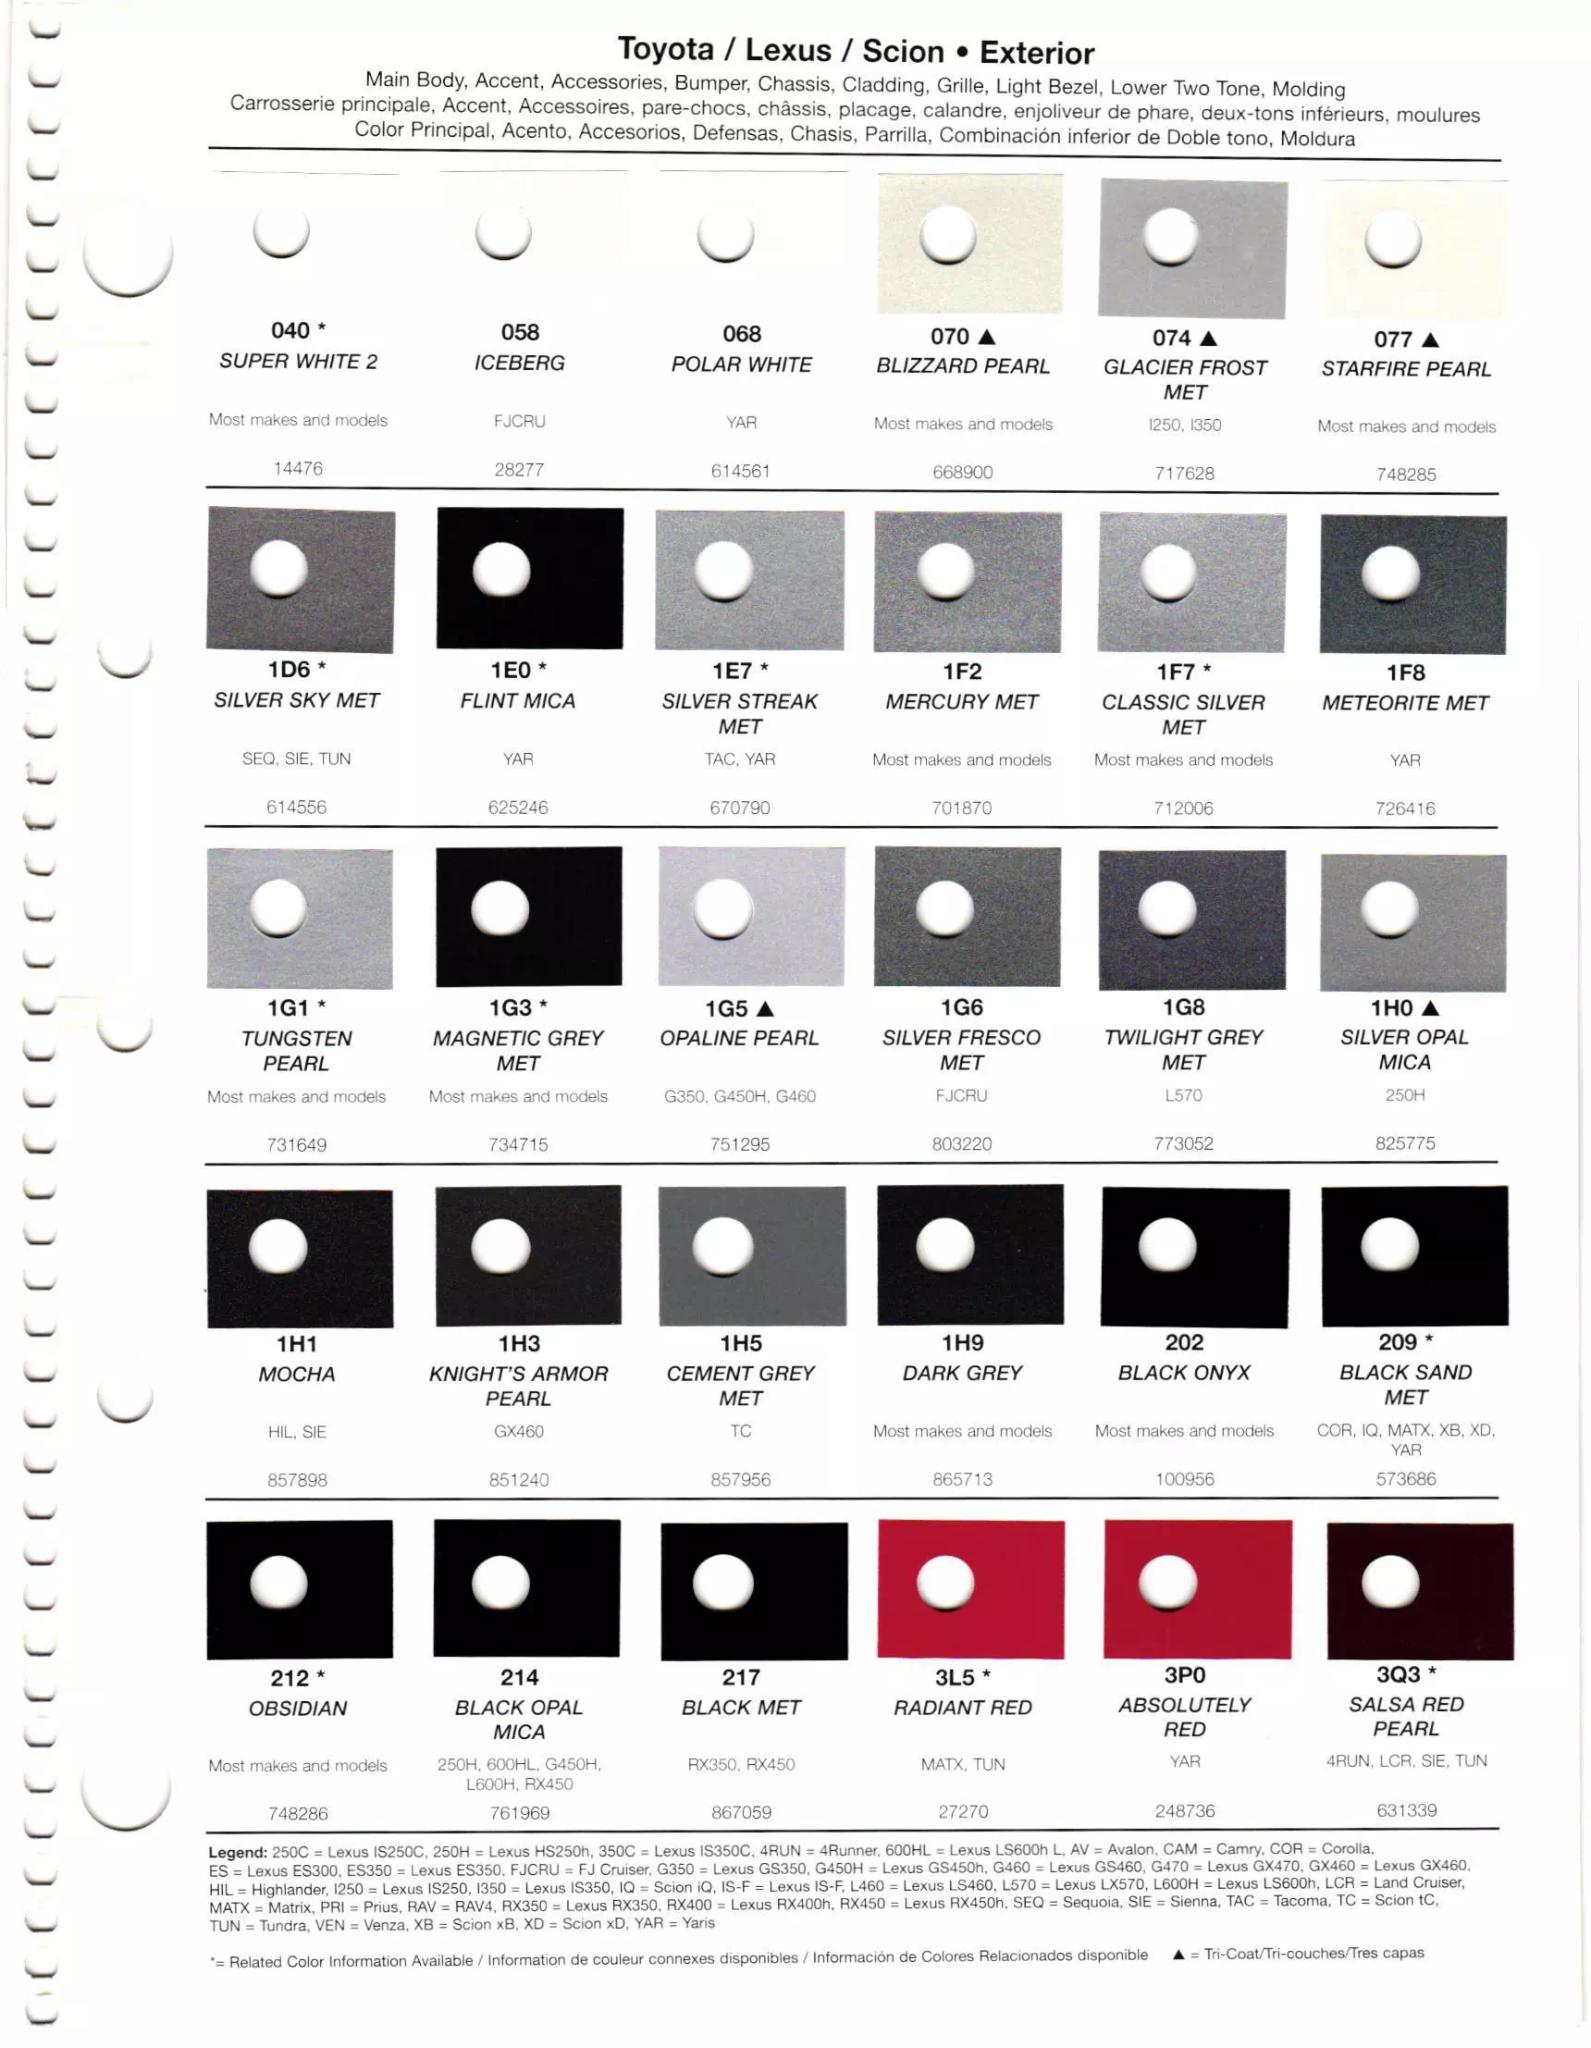 exterior, interior, wheel, and accent paint codes with paint chips used on toyota, lexus & scion vehicles